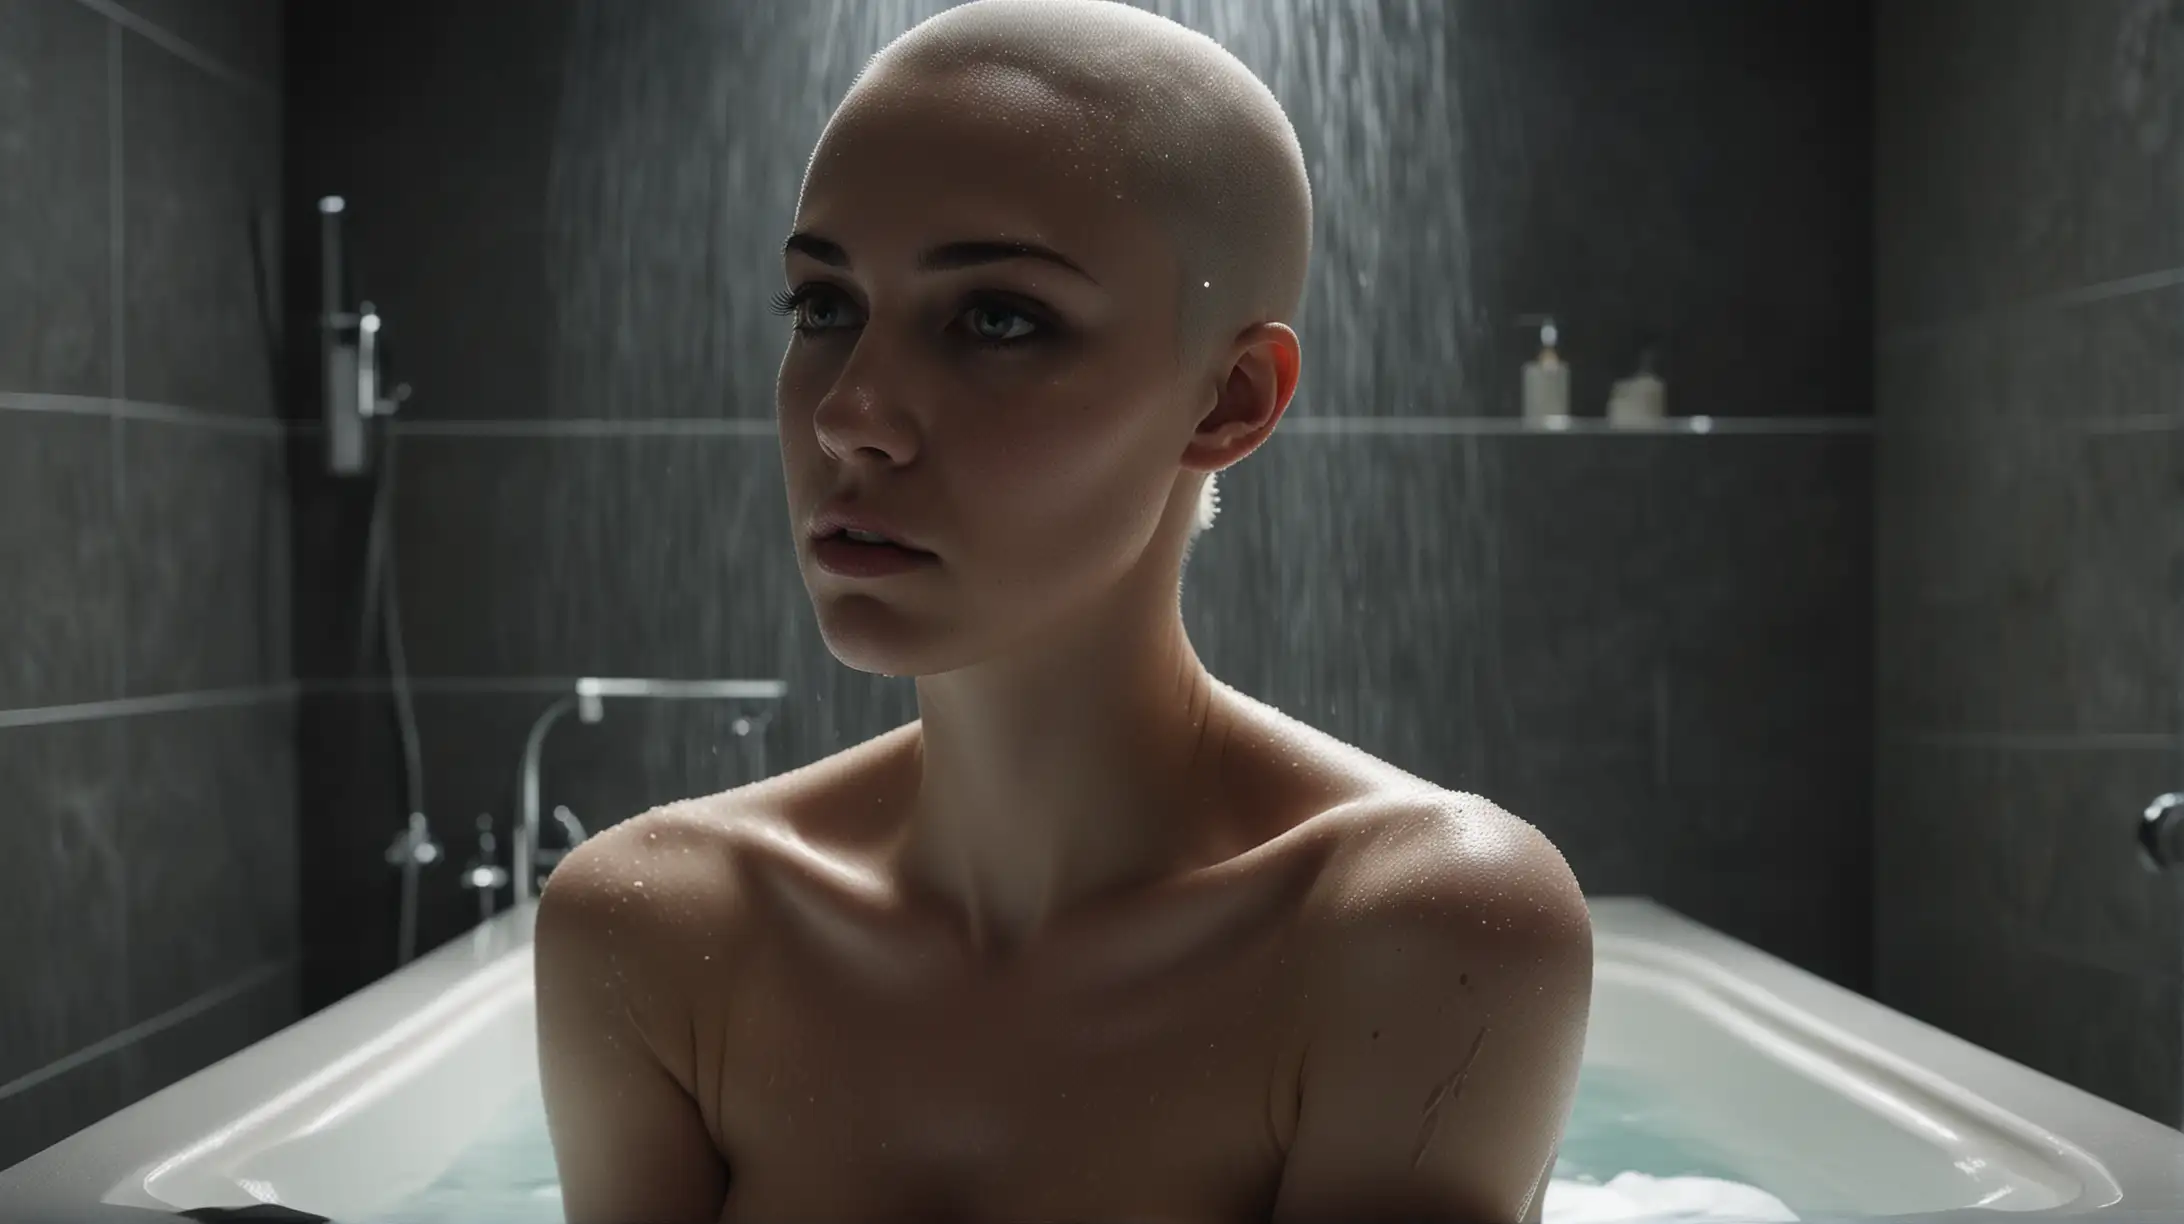 Sultry Exotic Bath Dark SciFi Minimalist Interiors with Young Women